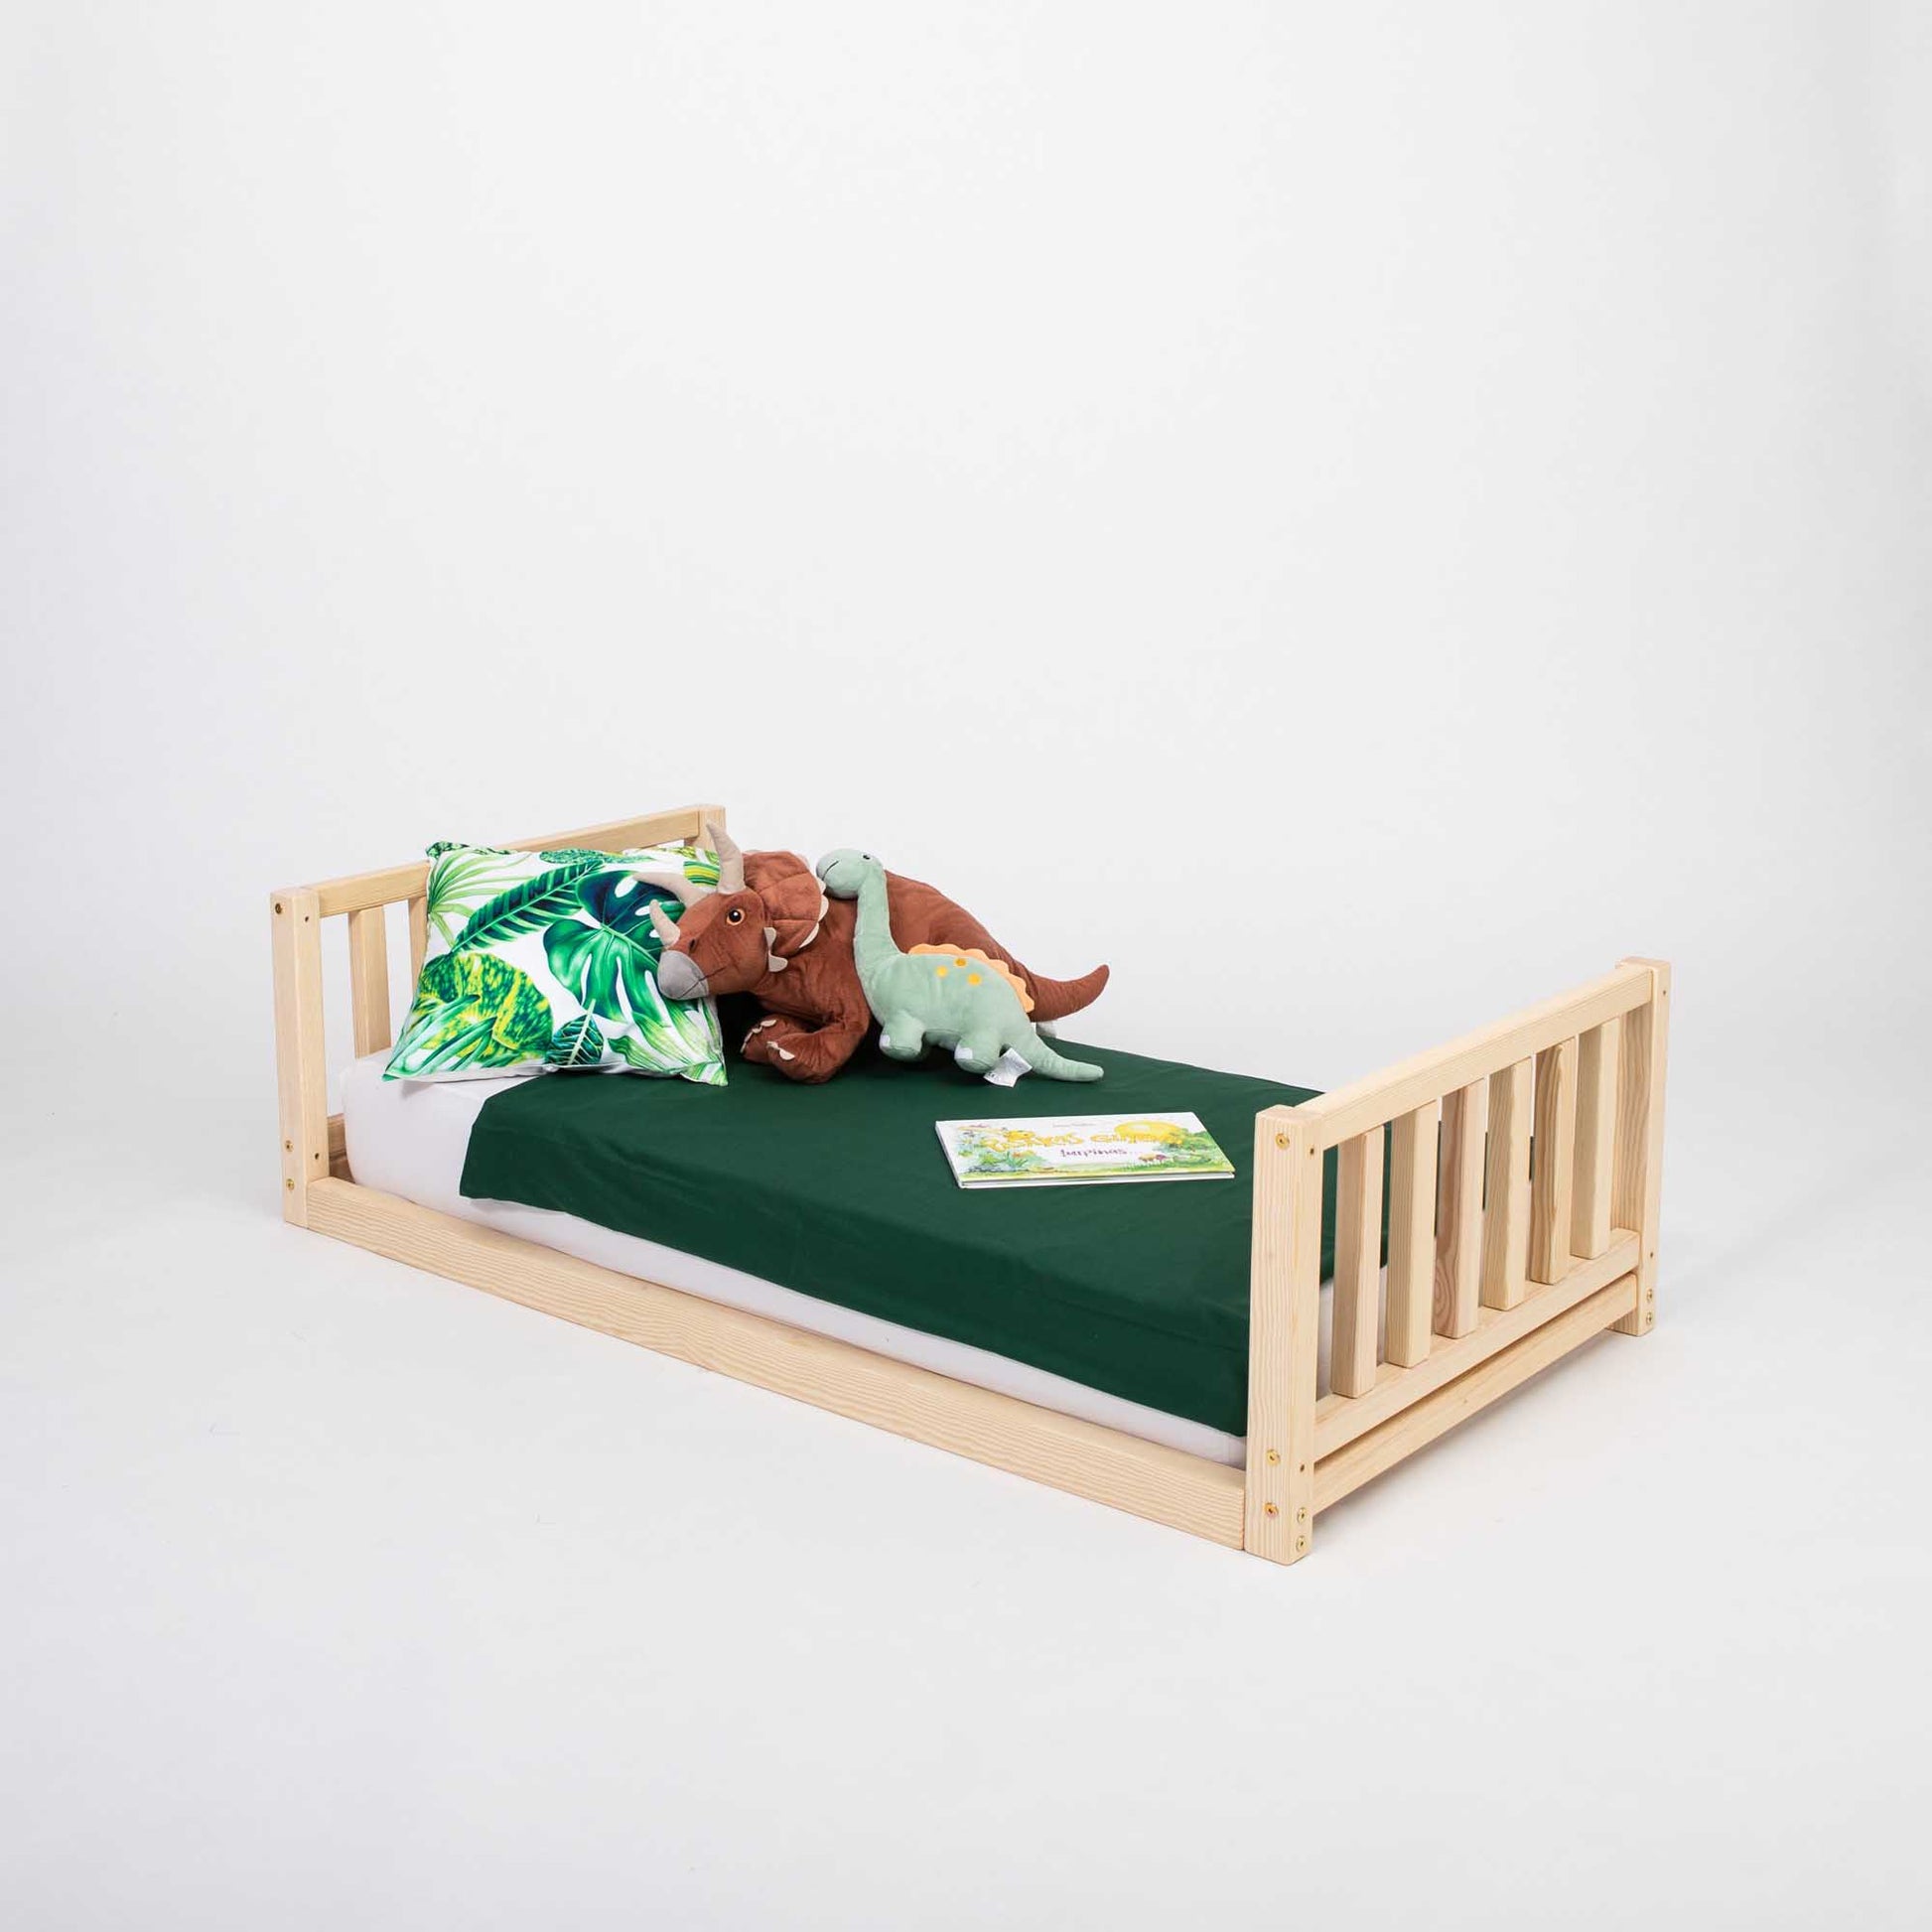 A Sweet Home From Wood Kids' bed with a headboard and footboard with a stuffed animal on it.